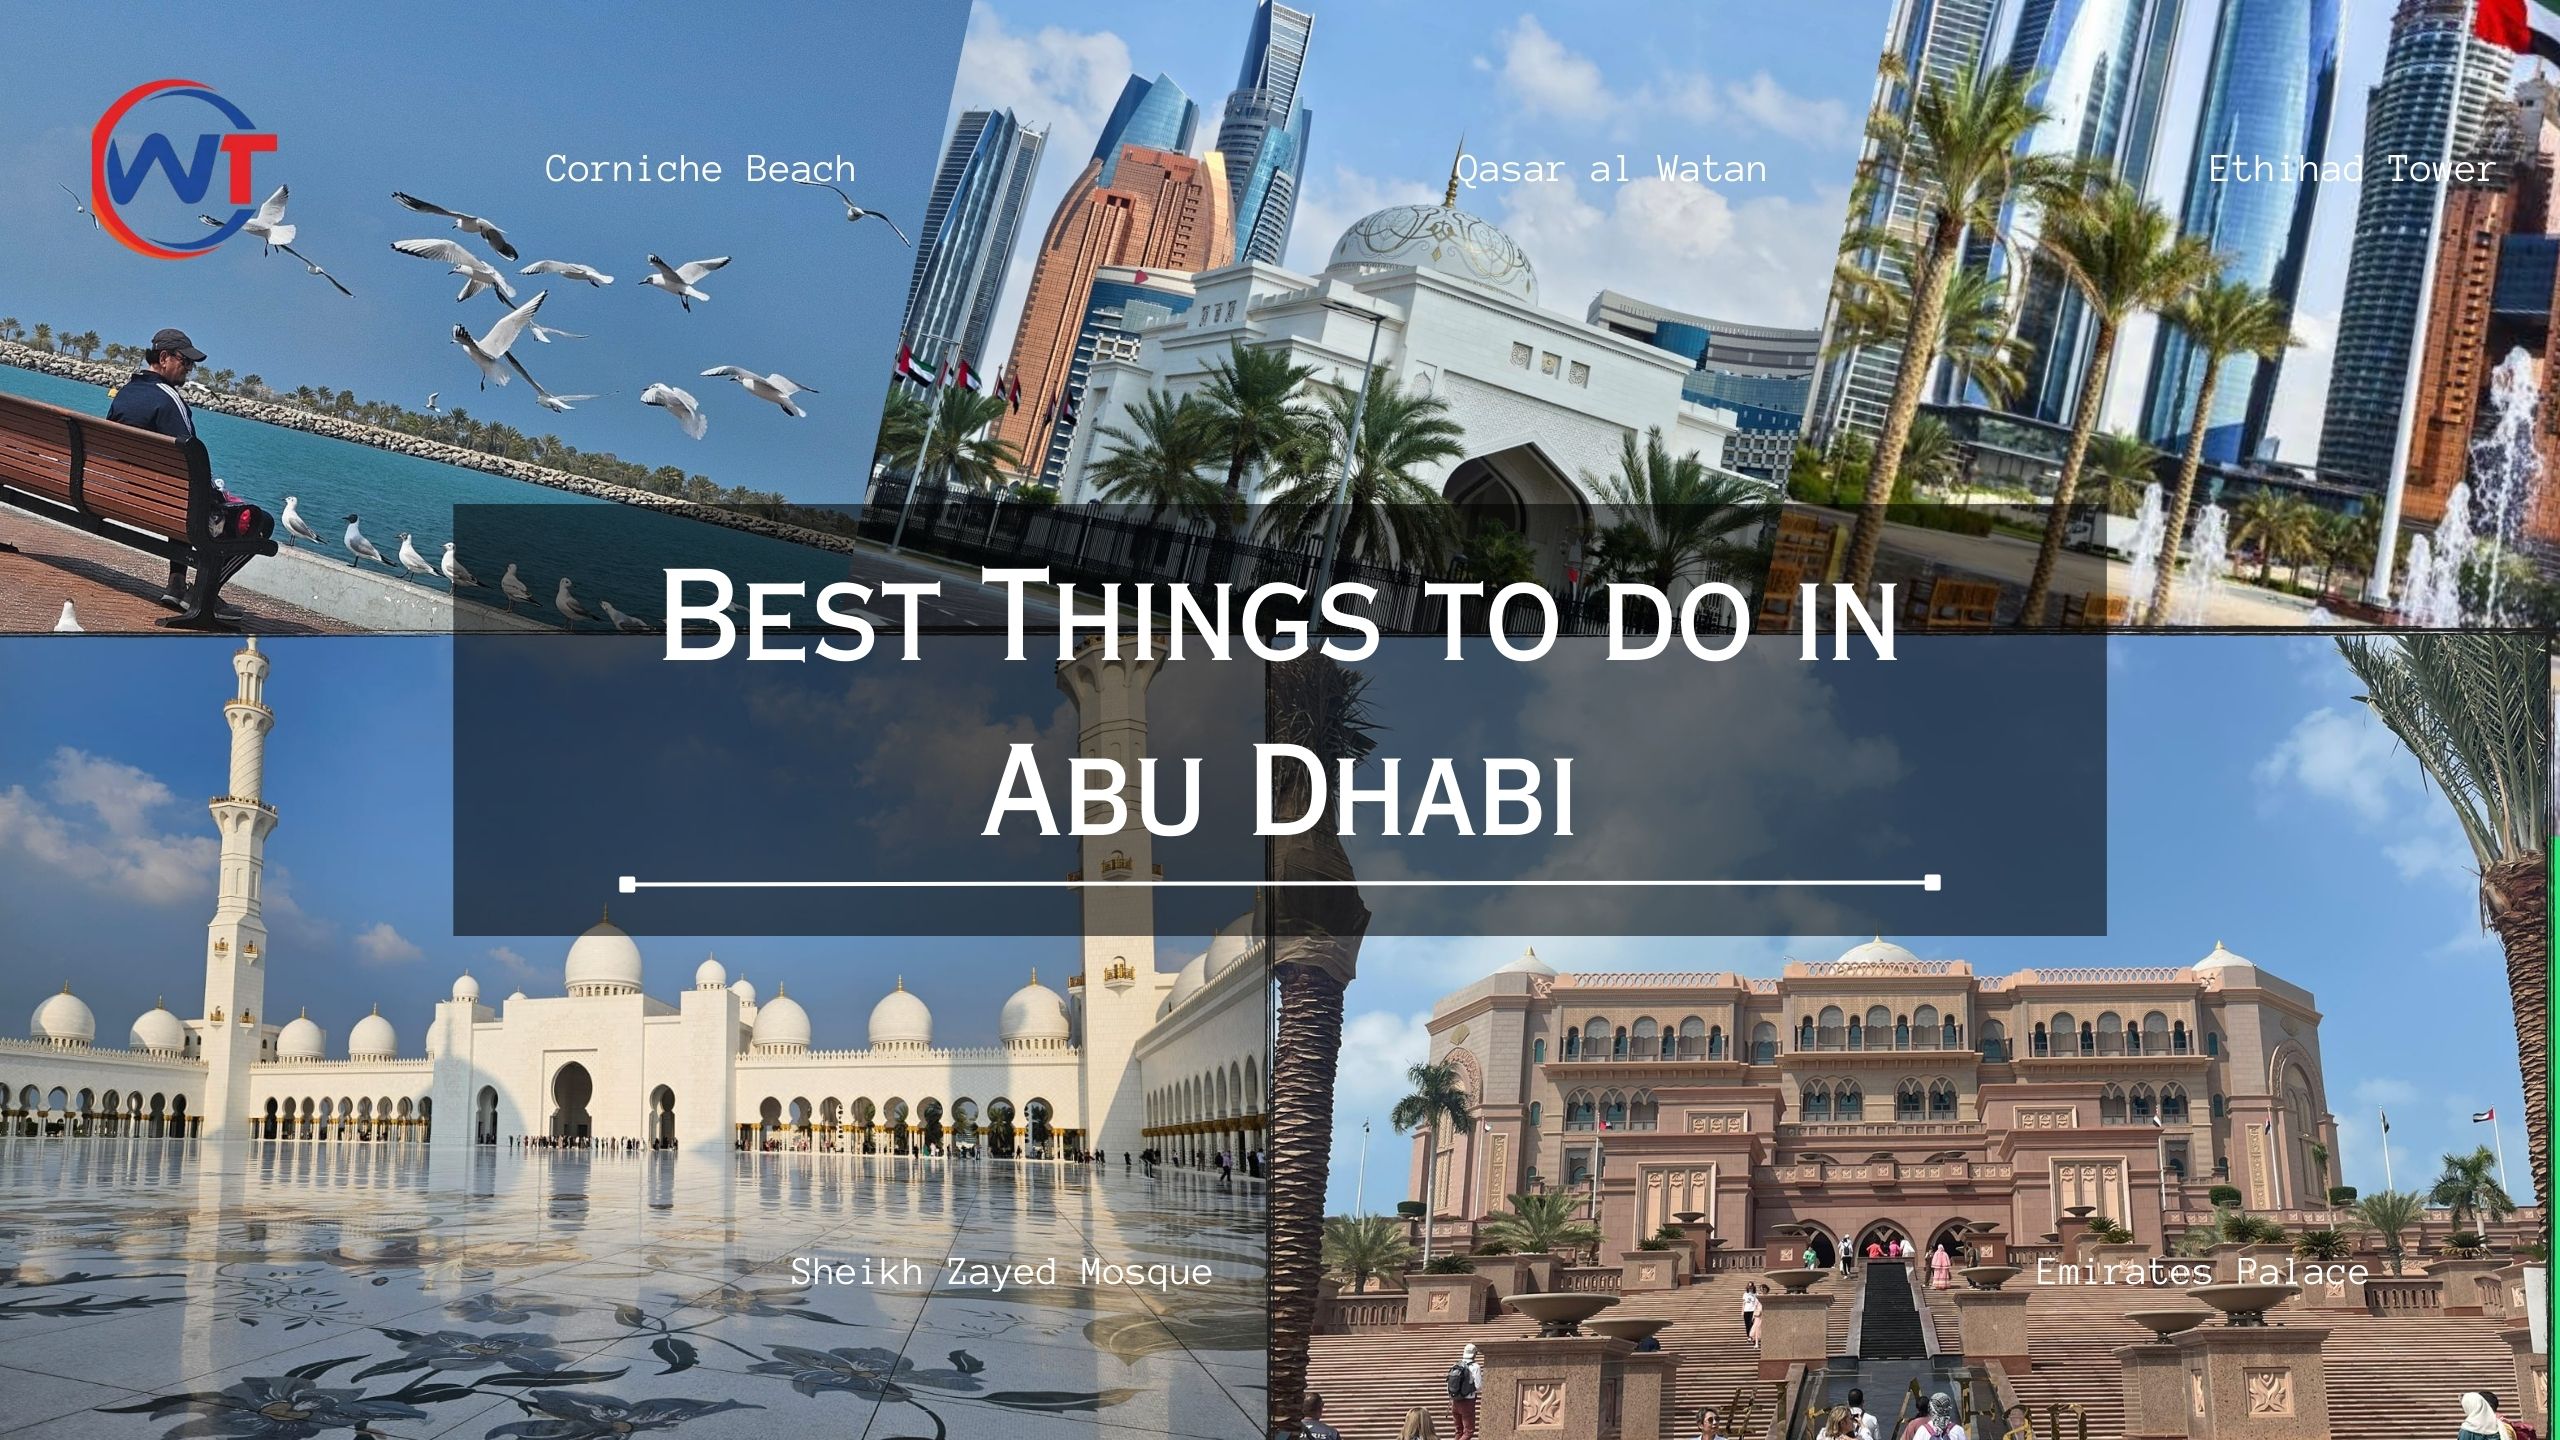 Best things to do in abu dhabi by alweam passenger transport